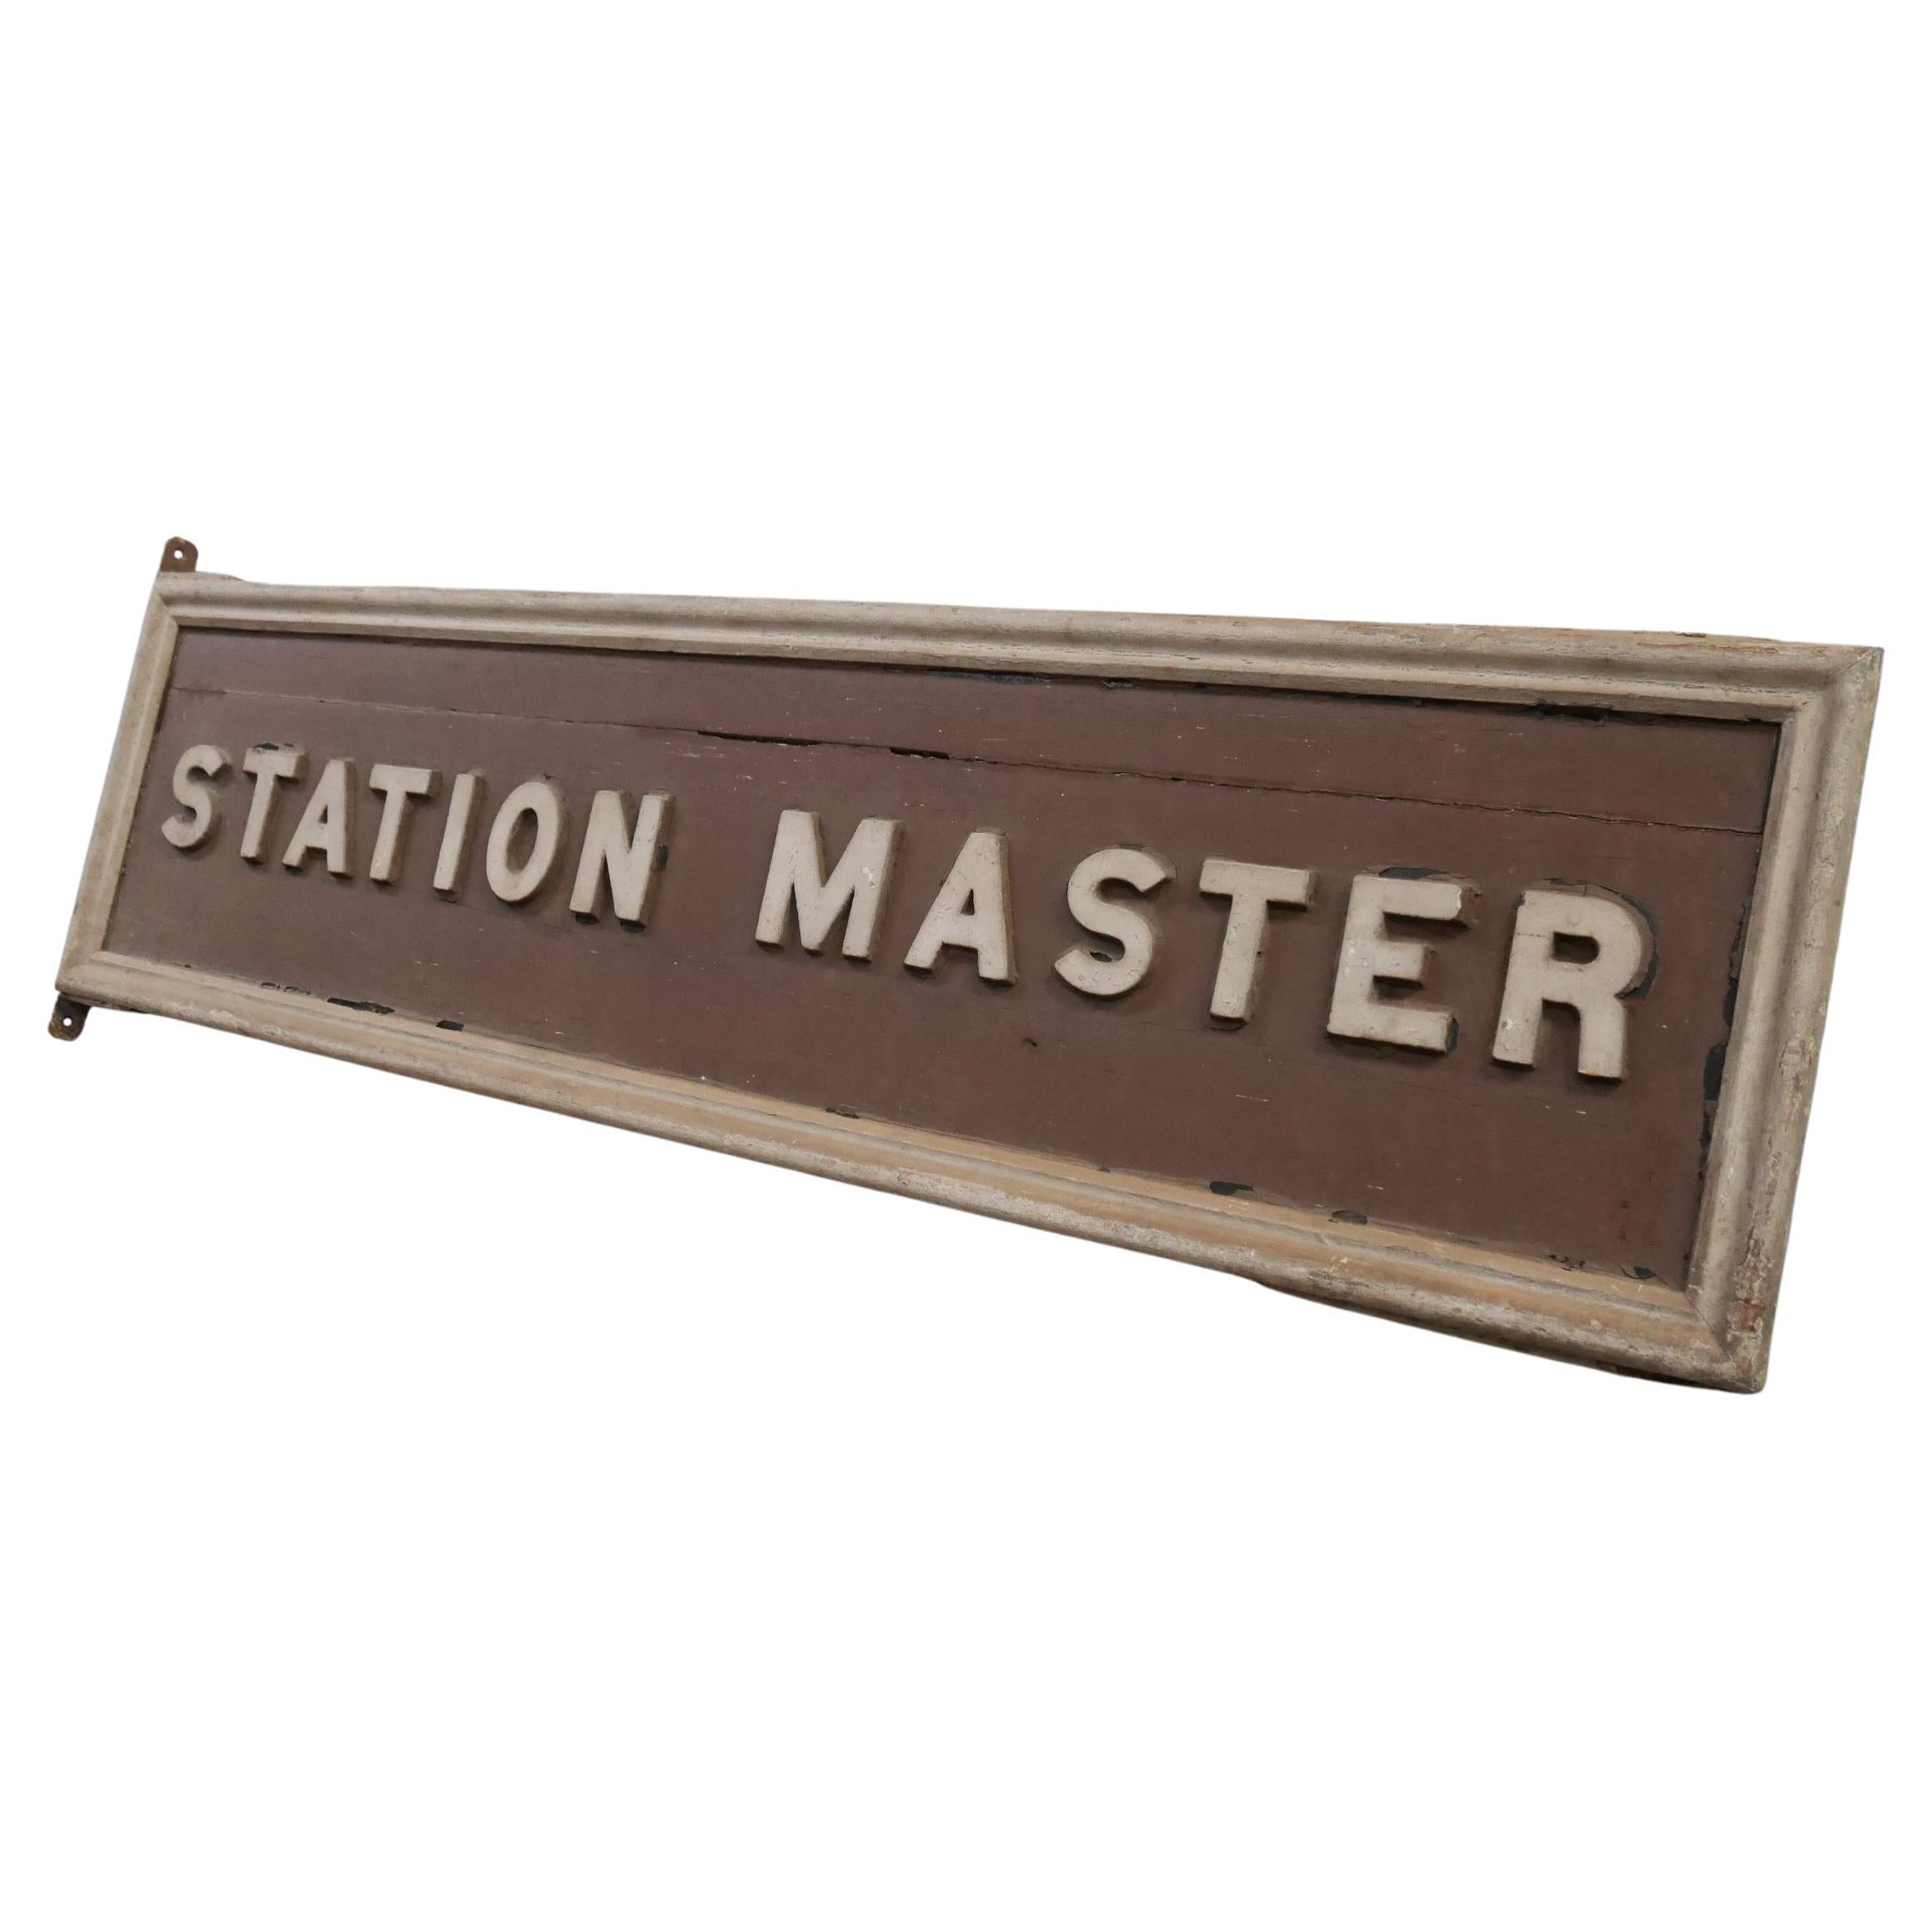 Early Timber & Iron 'Station Master' Railway Sign